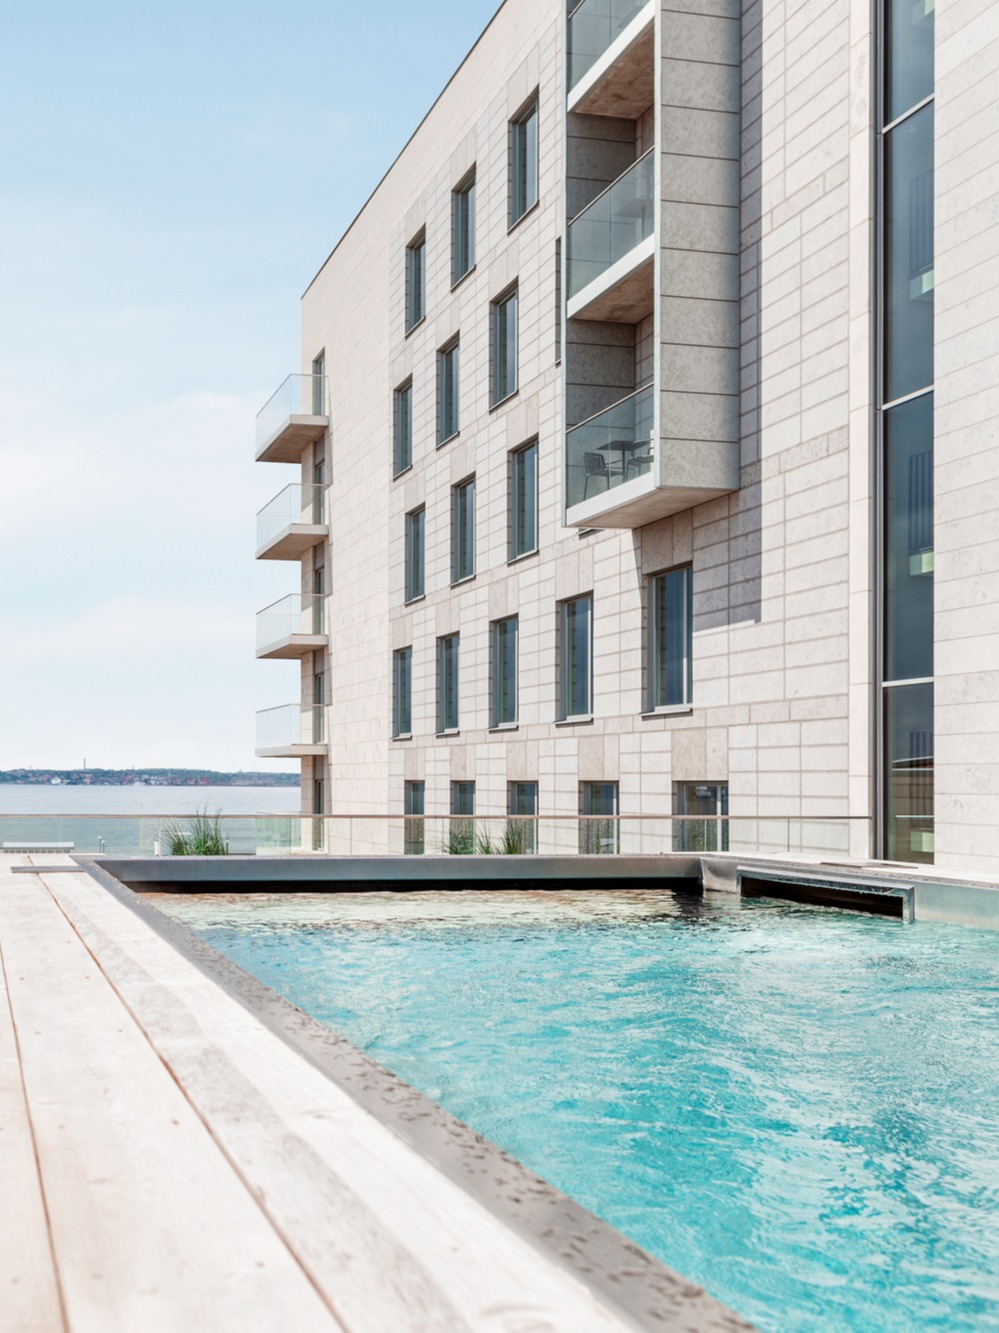 View from the rooftop pool at Clarion Hotel® Sea U in Helsingborg.